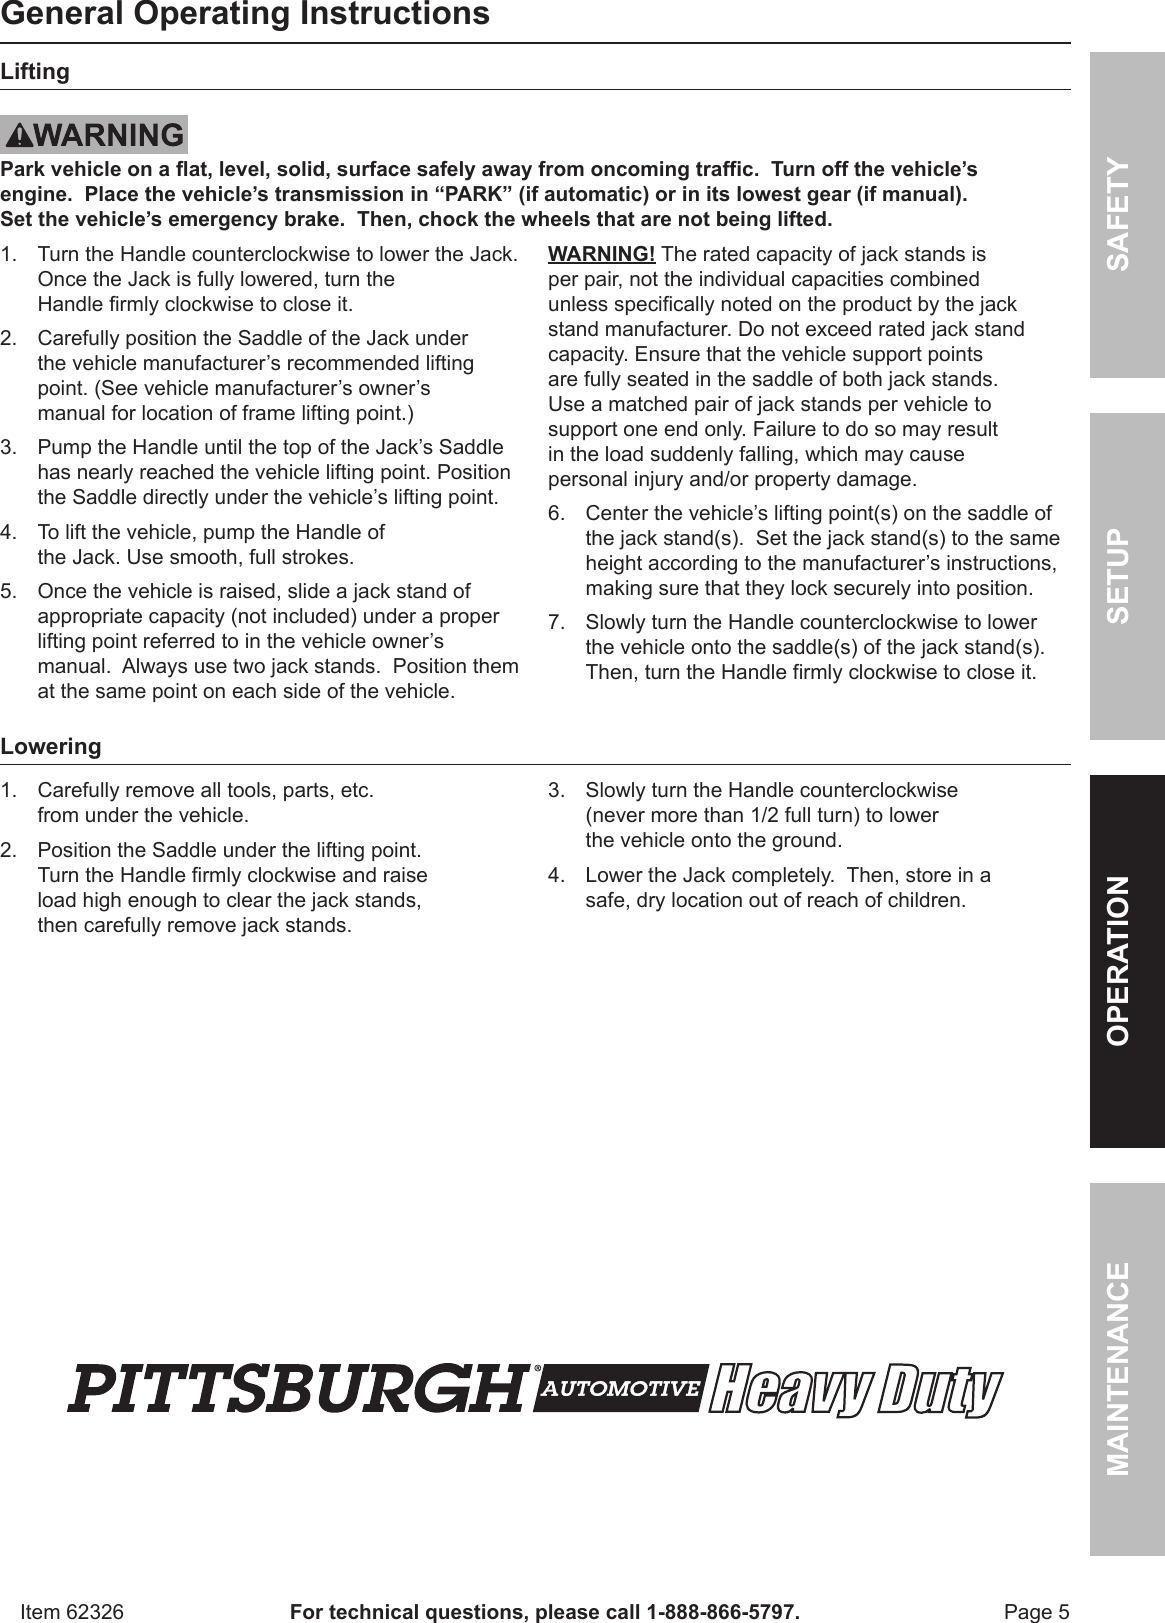 Page 5 of 8 - Manual For The 62326 3 Ton Low Profile Steel Heavy Duty Floor Jack With Rapid Pump®